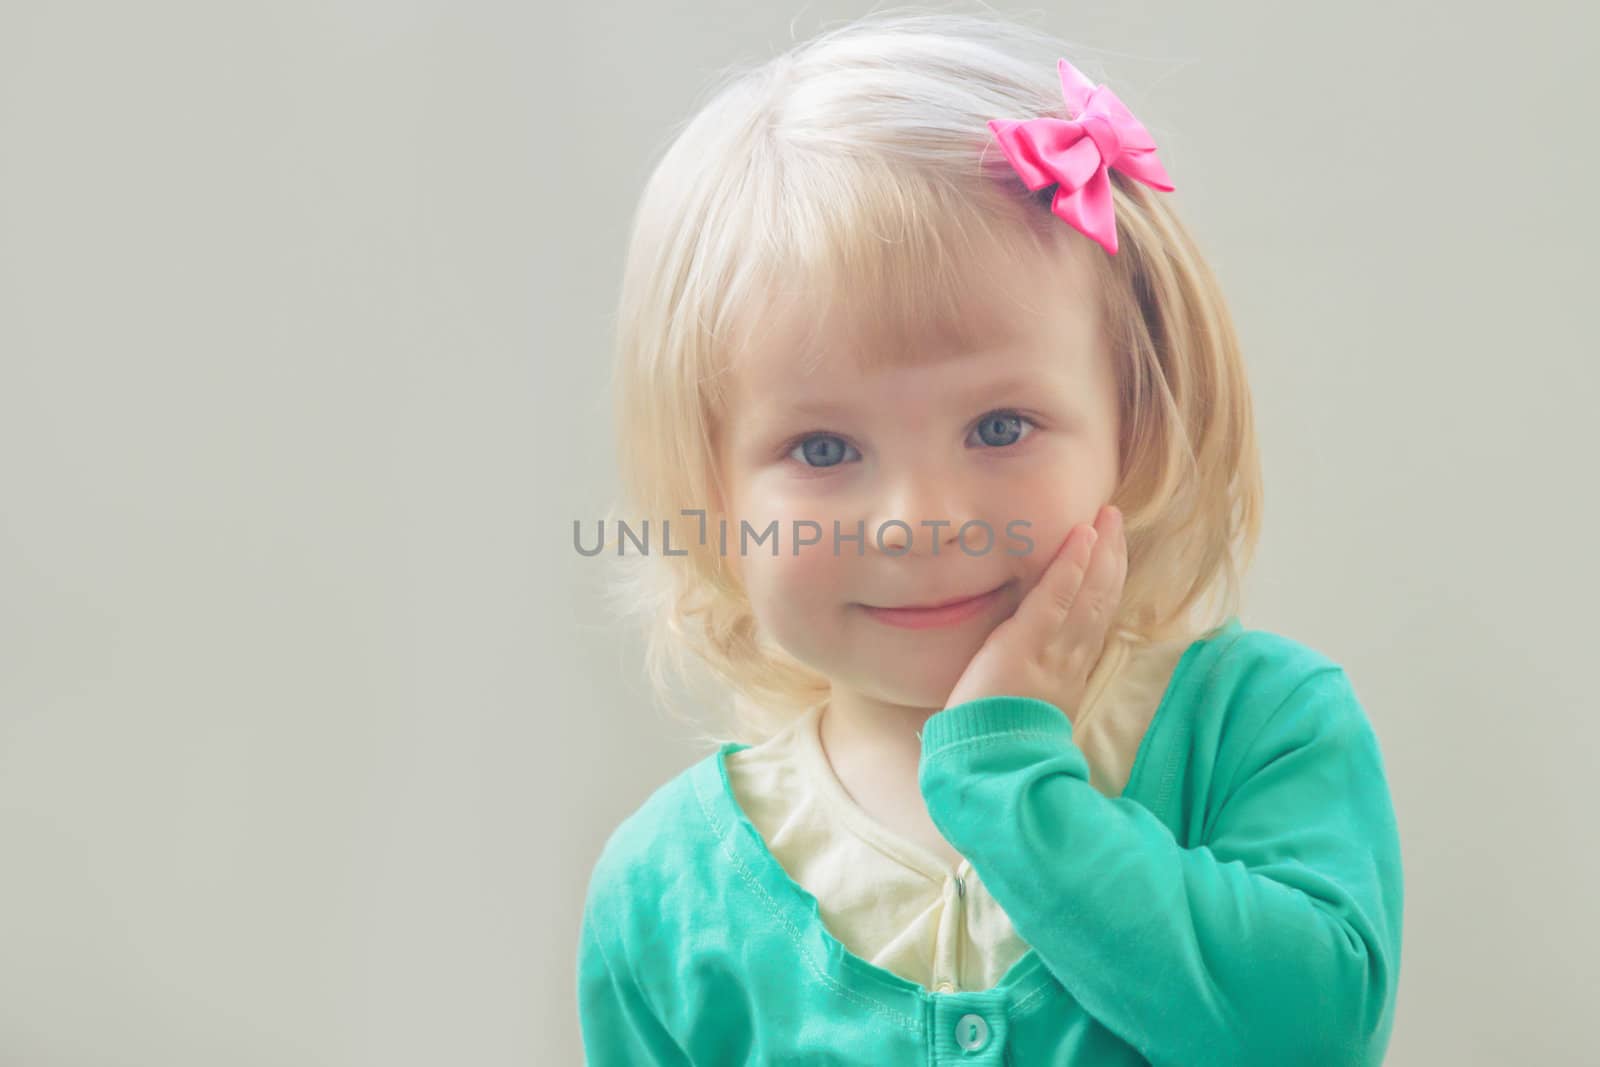 Lovely portrait of smiling baby girl with bow